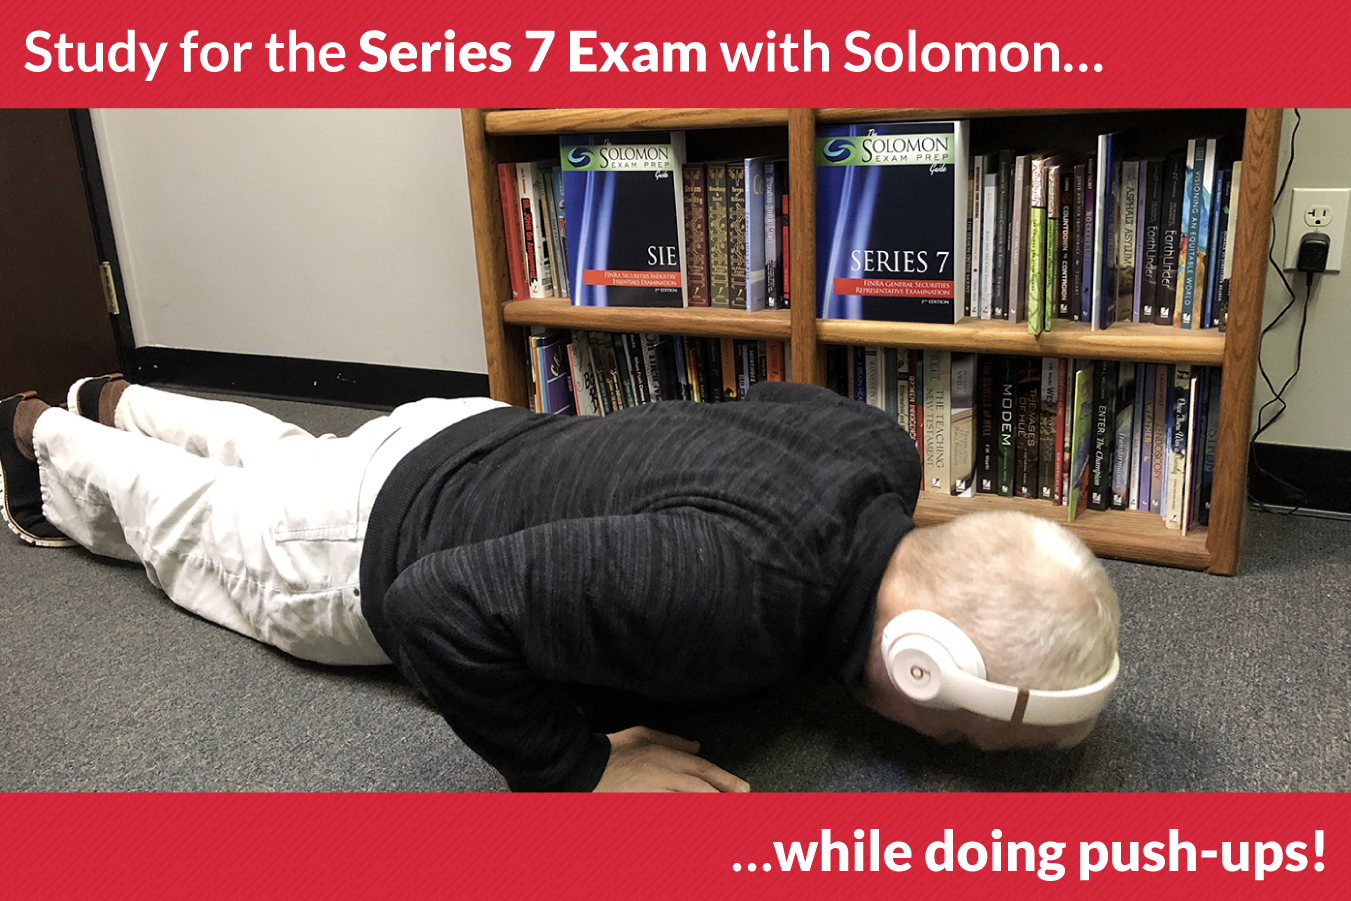 Study for the Series 7 Exam with Solomon -- while doing push-ups!